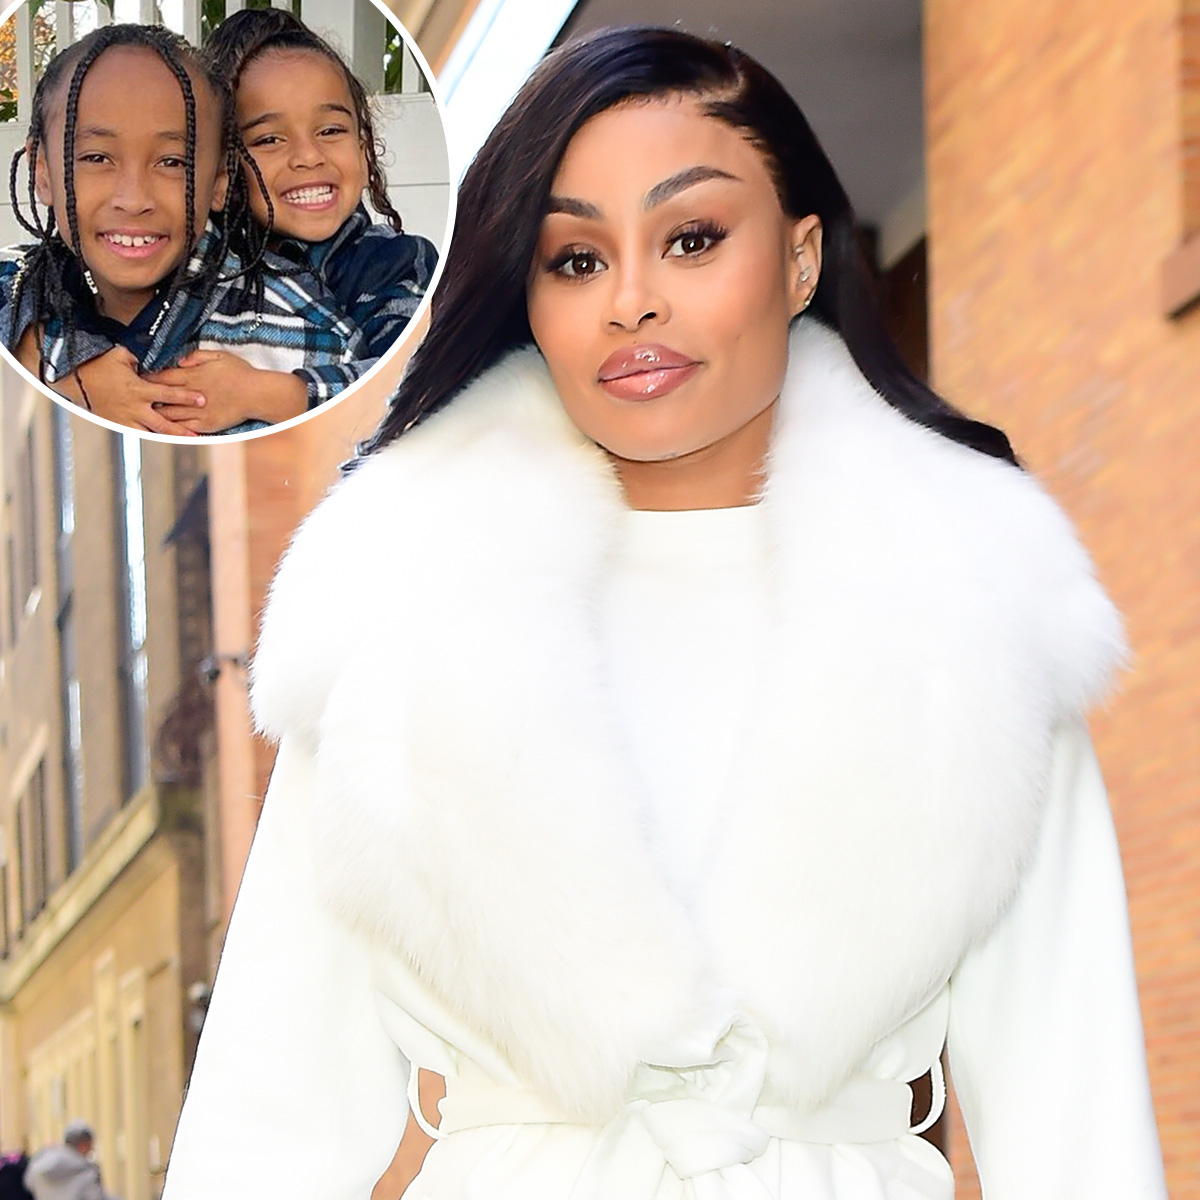 Blac Chyna Shares Her Kids Reactions to Her Breast & Butt Reductions